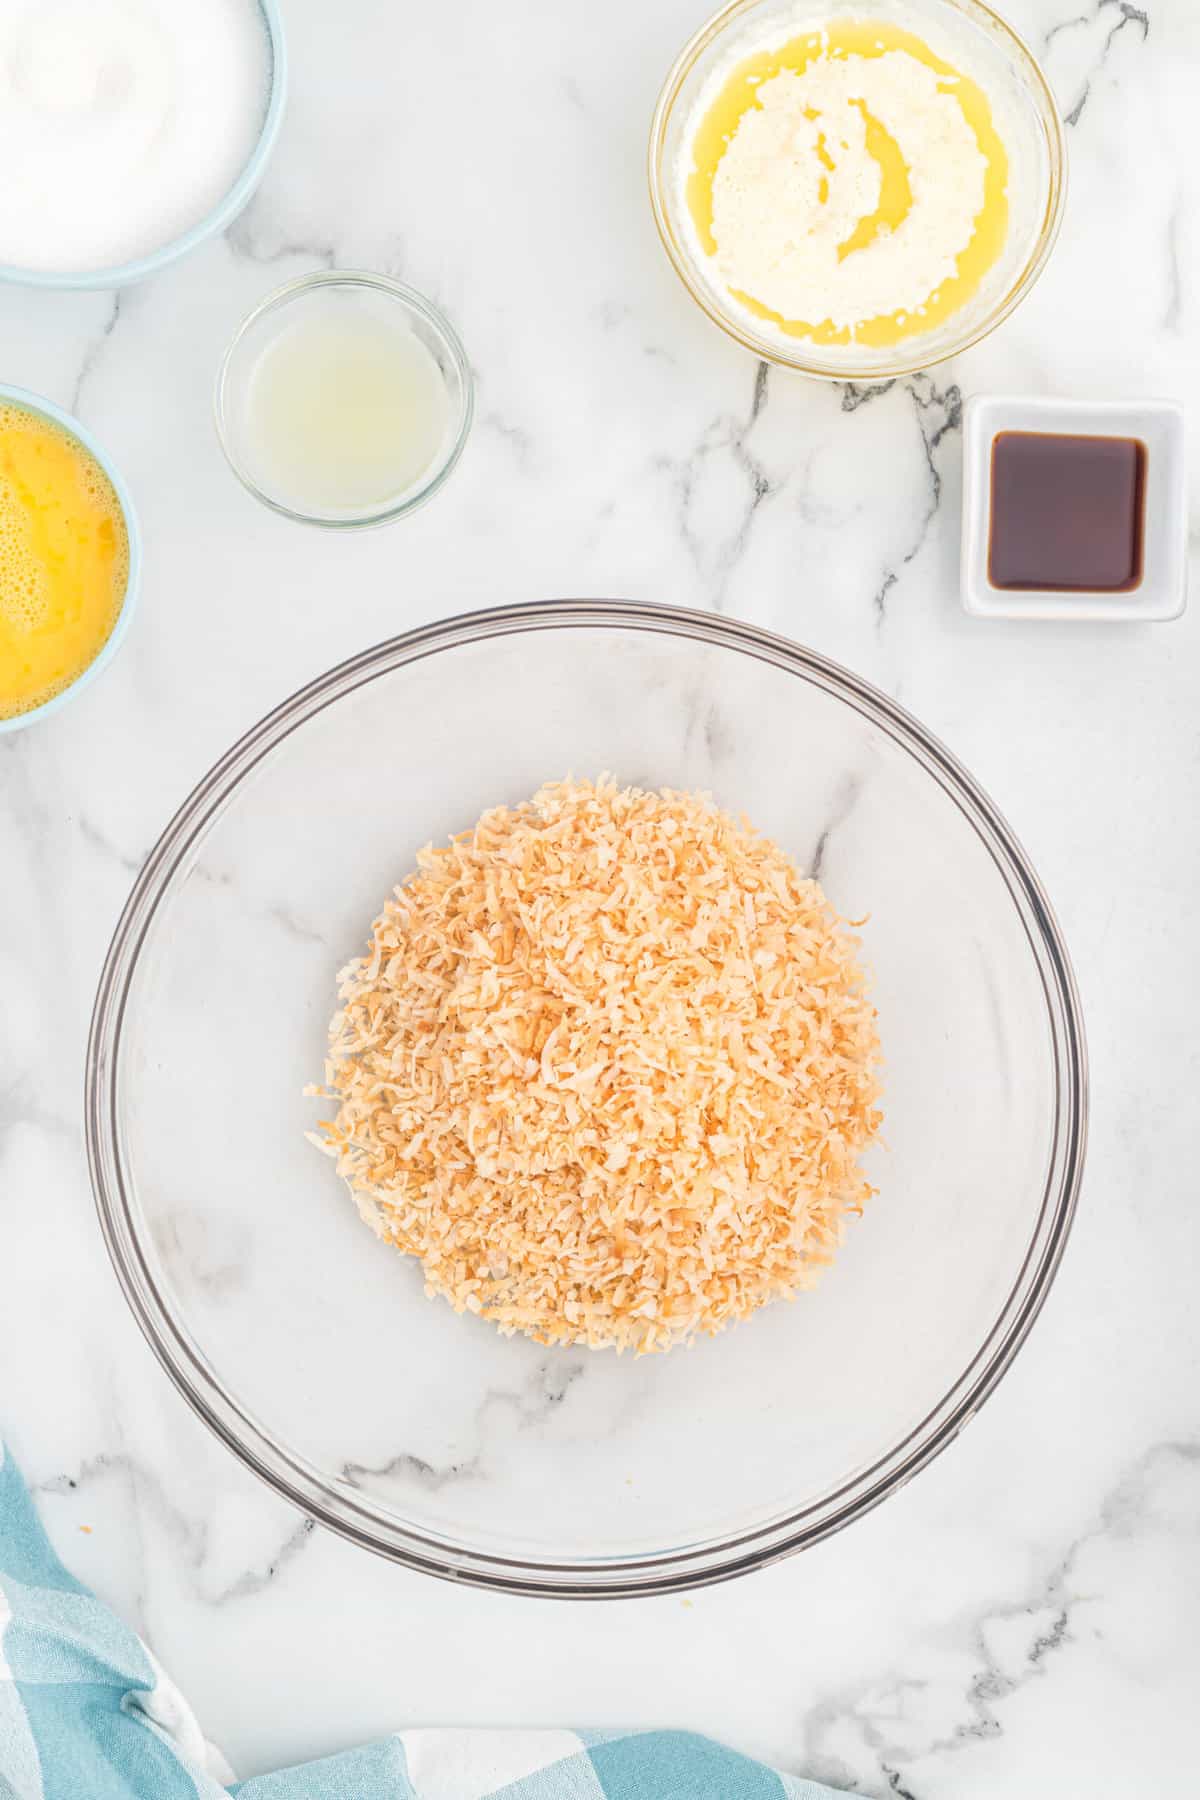 Toasted coconut in a large mixing bowl with other ingredients in small bowls.